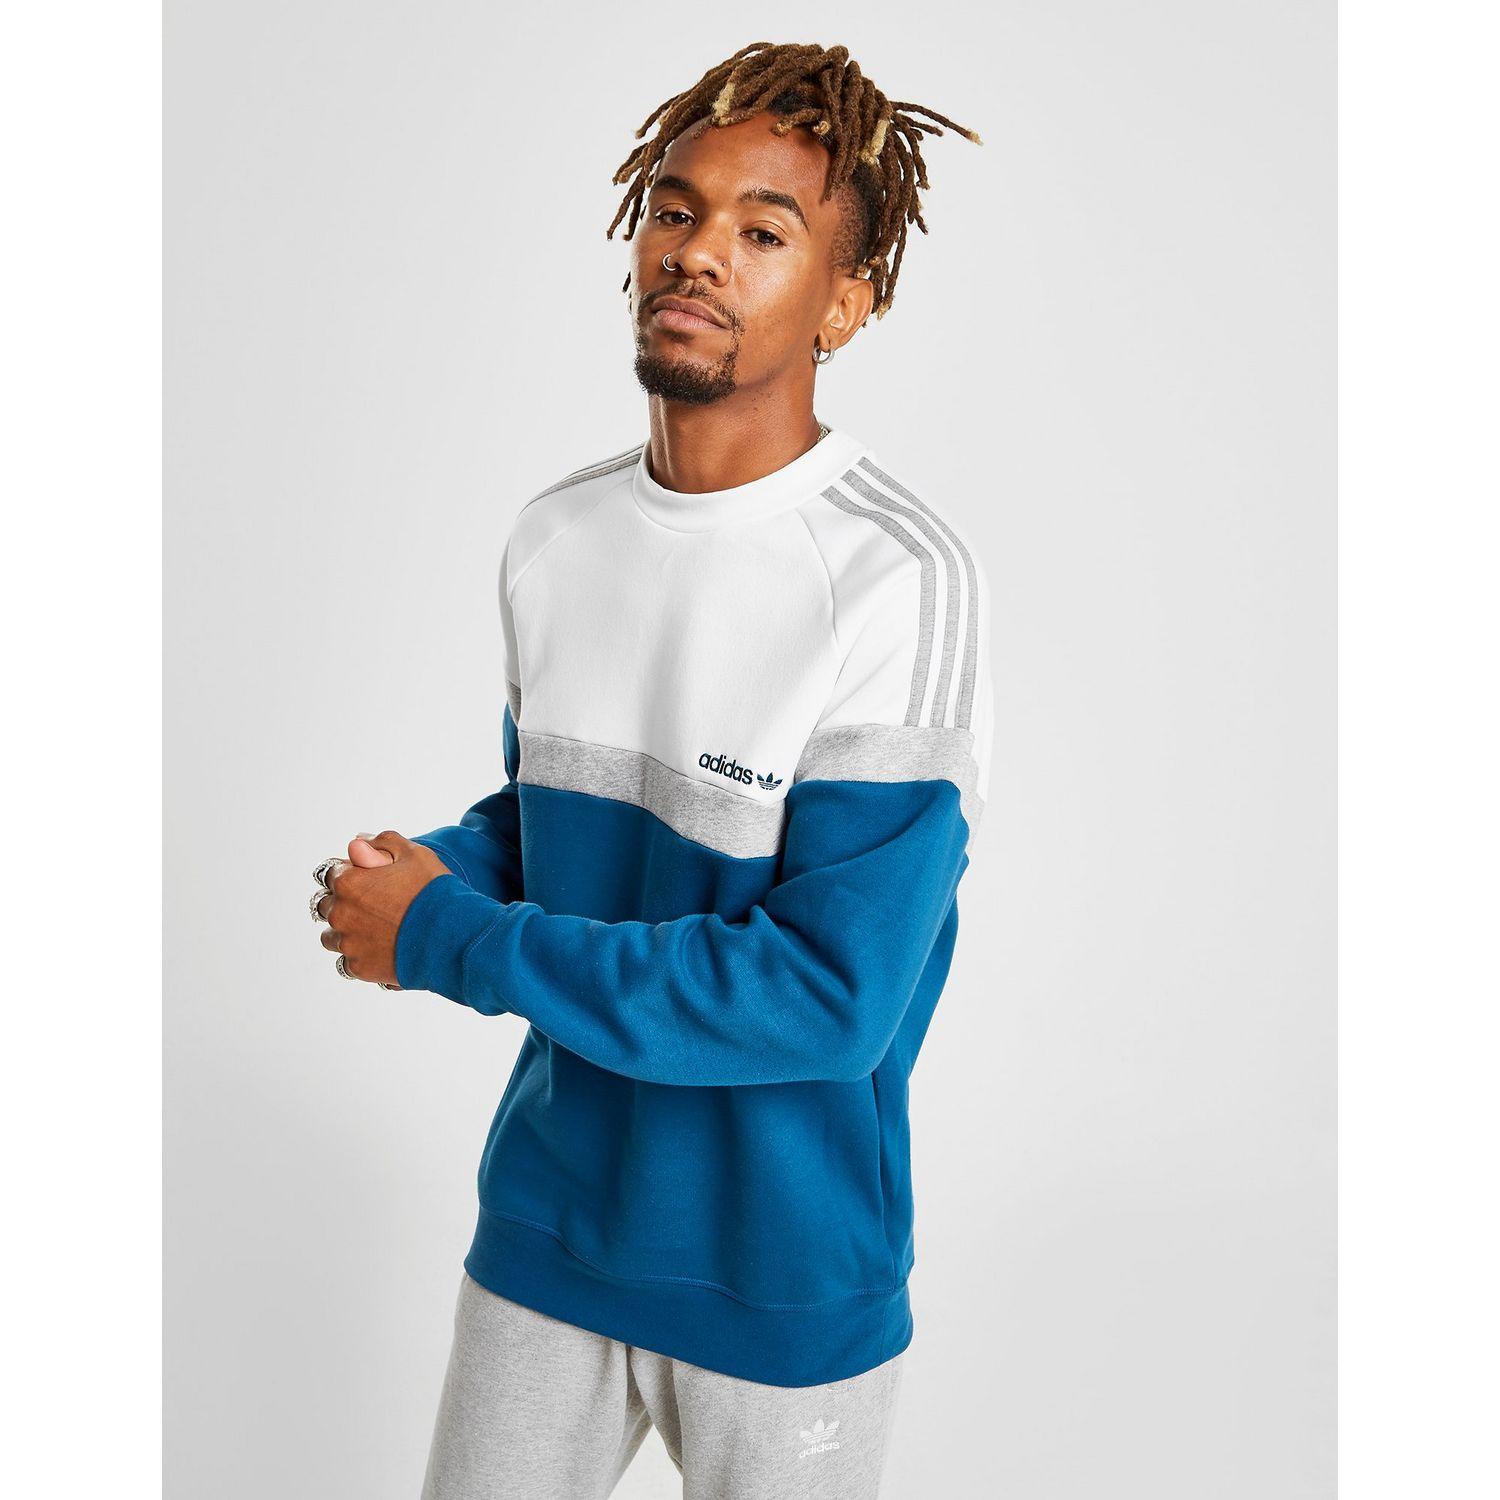 Adidas Itasca Crew Sweatshirt Clearance Sale, UP TO 50% OFF |  www.apmusicales.com